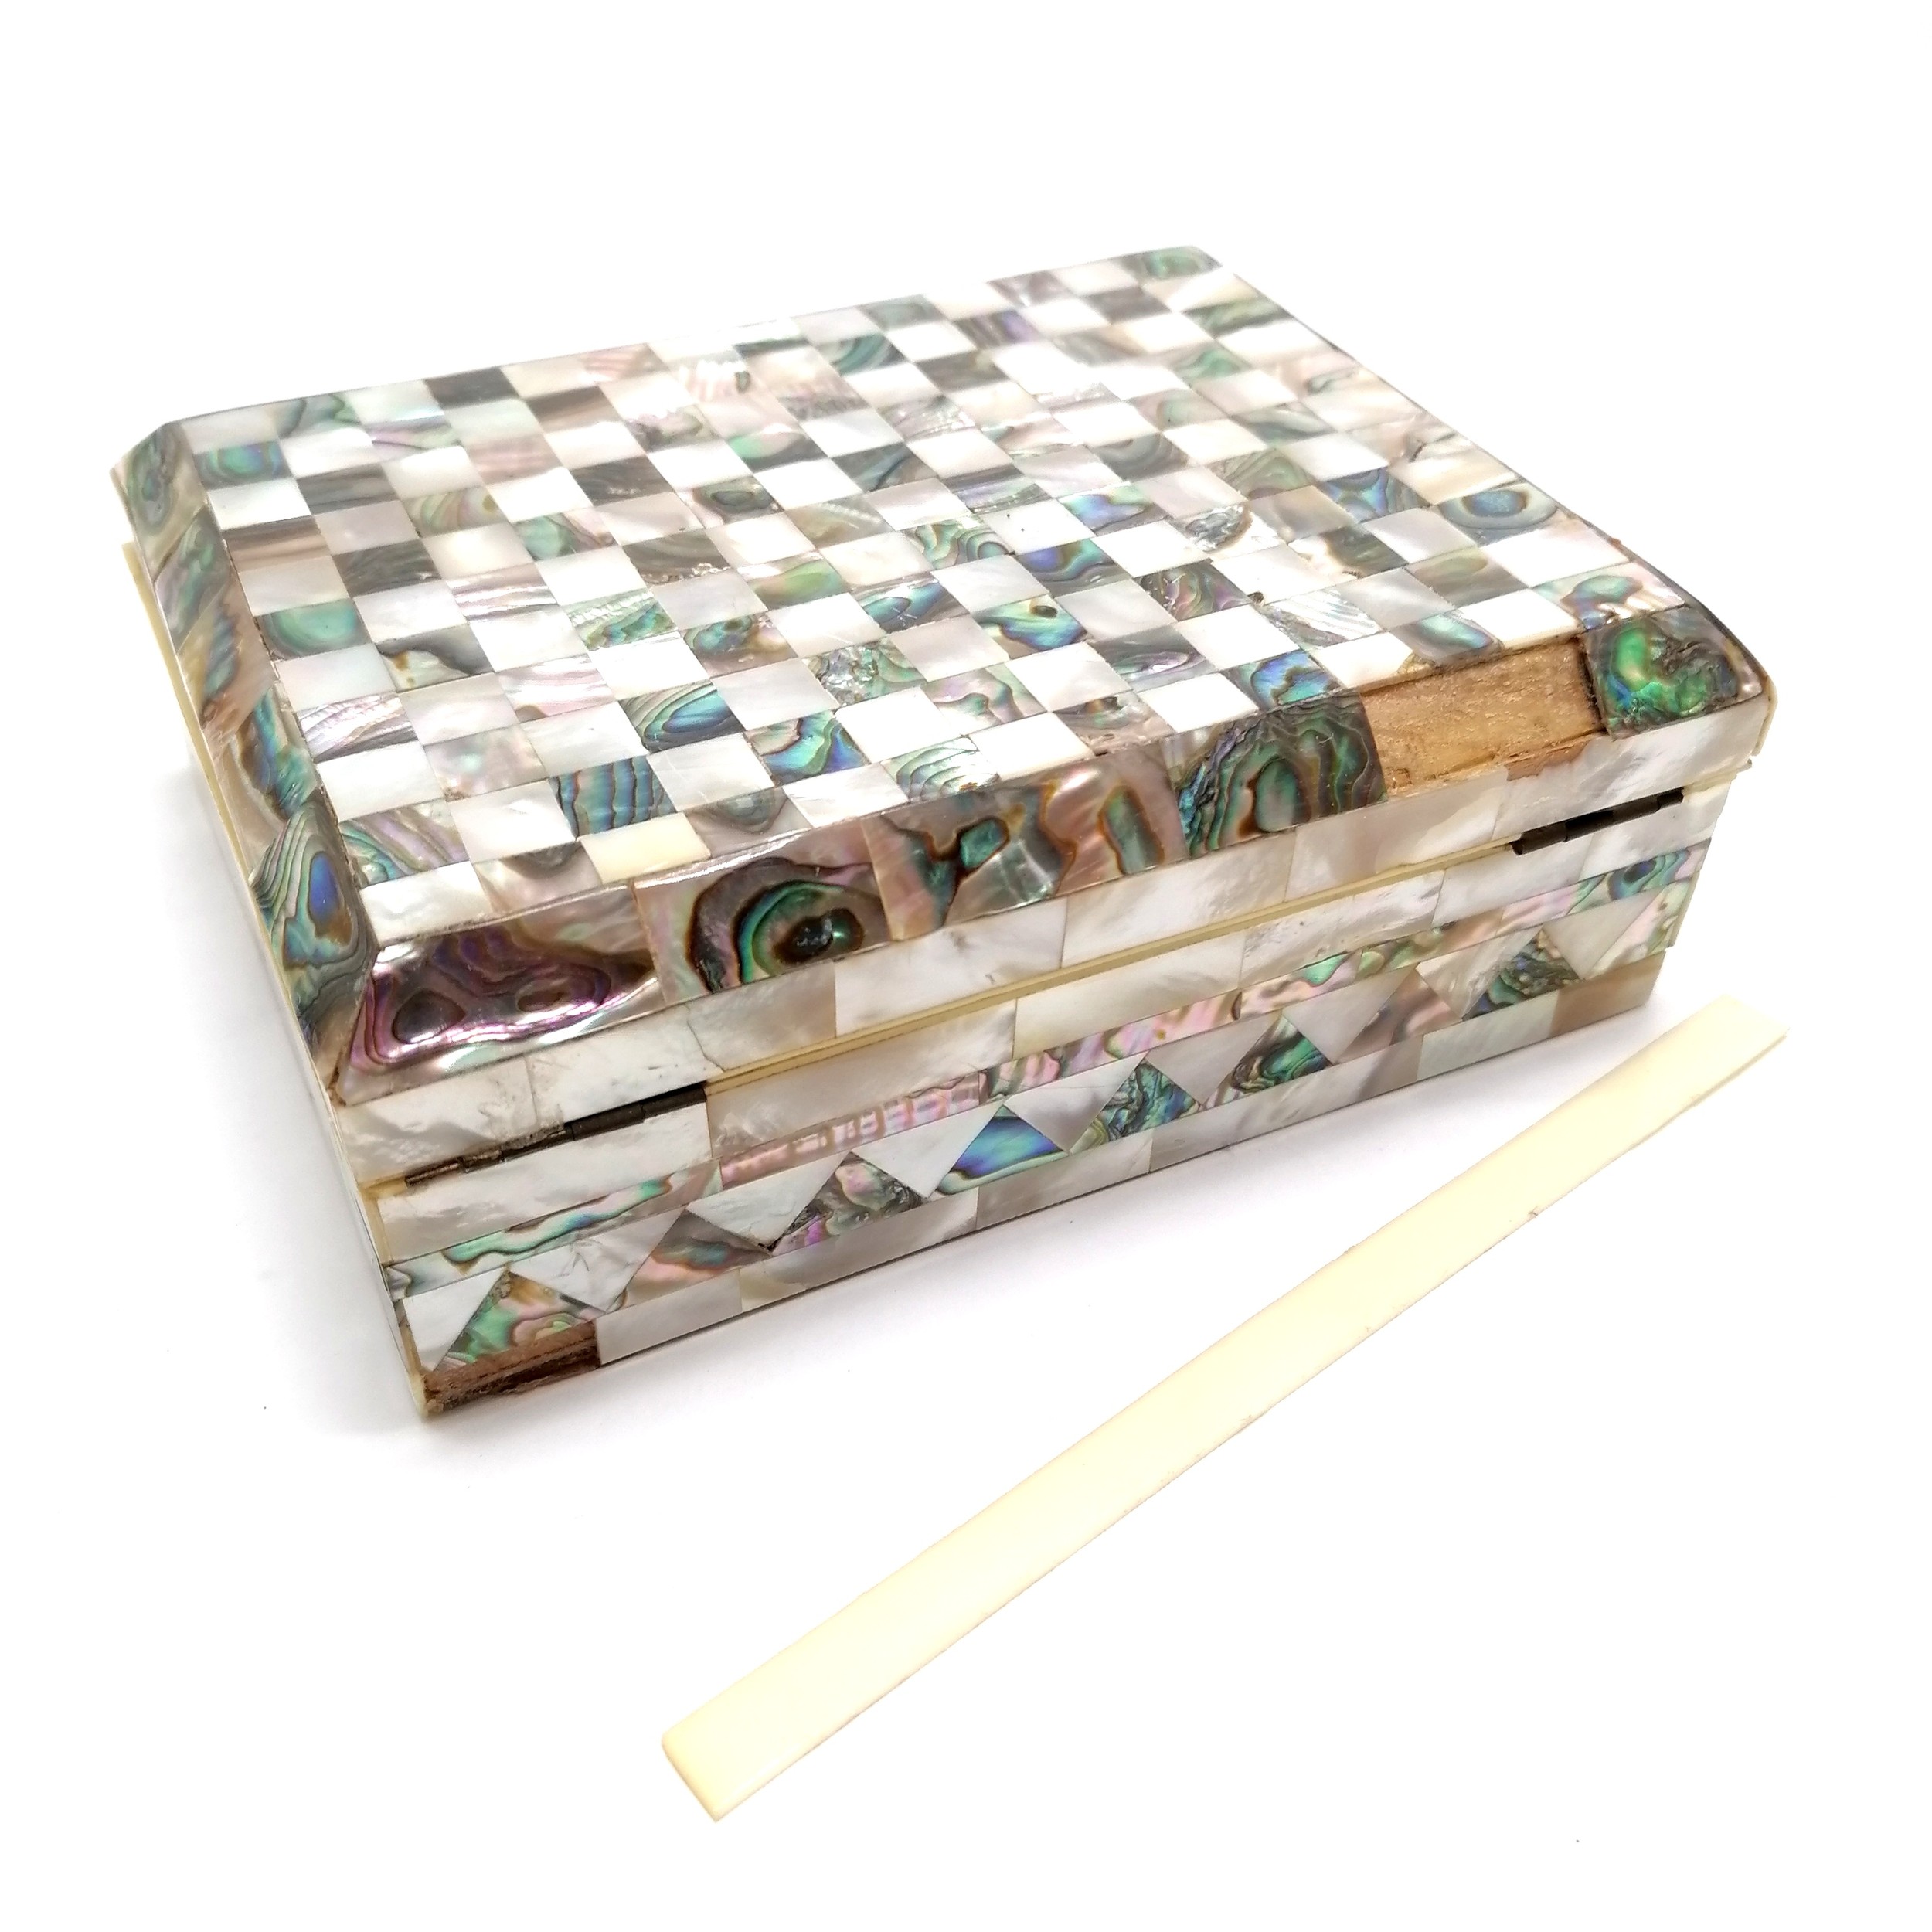 2 x mother of pearl / paua shell decorated boxes - largest 17cm x 13cm x 5.5cm and has some losses - Image 4 of 4